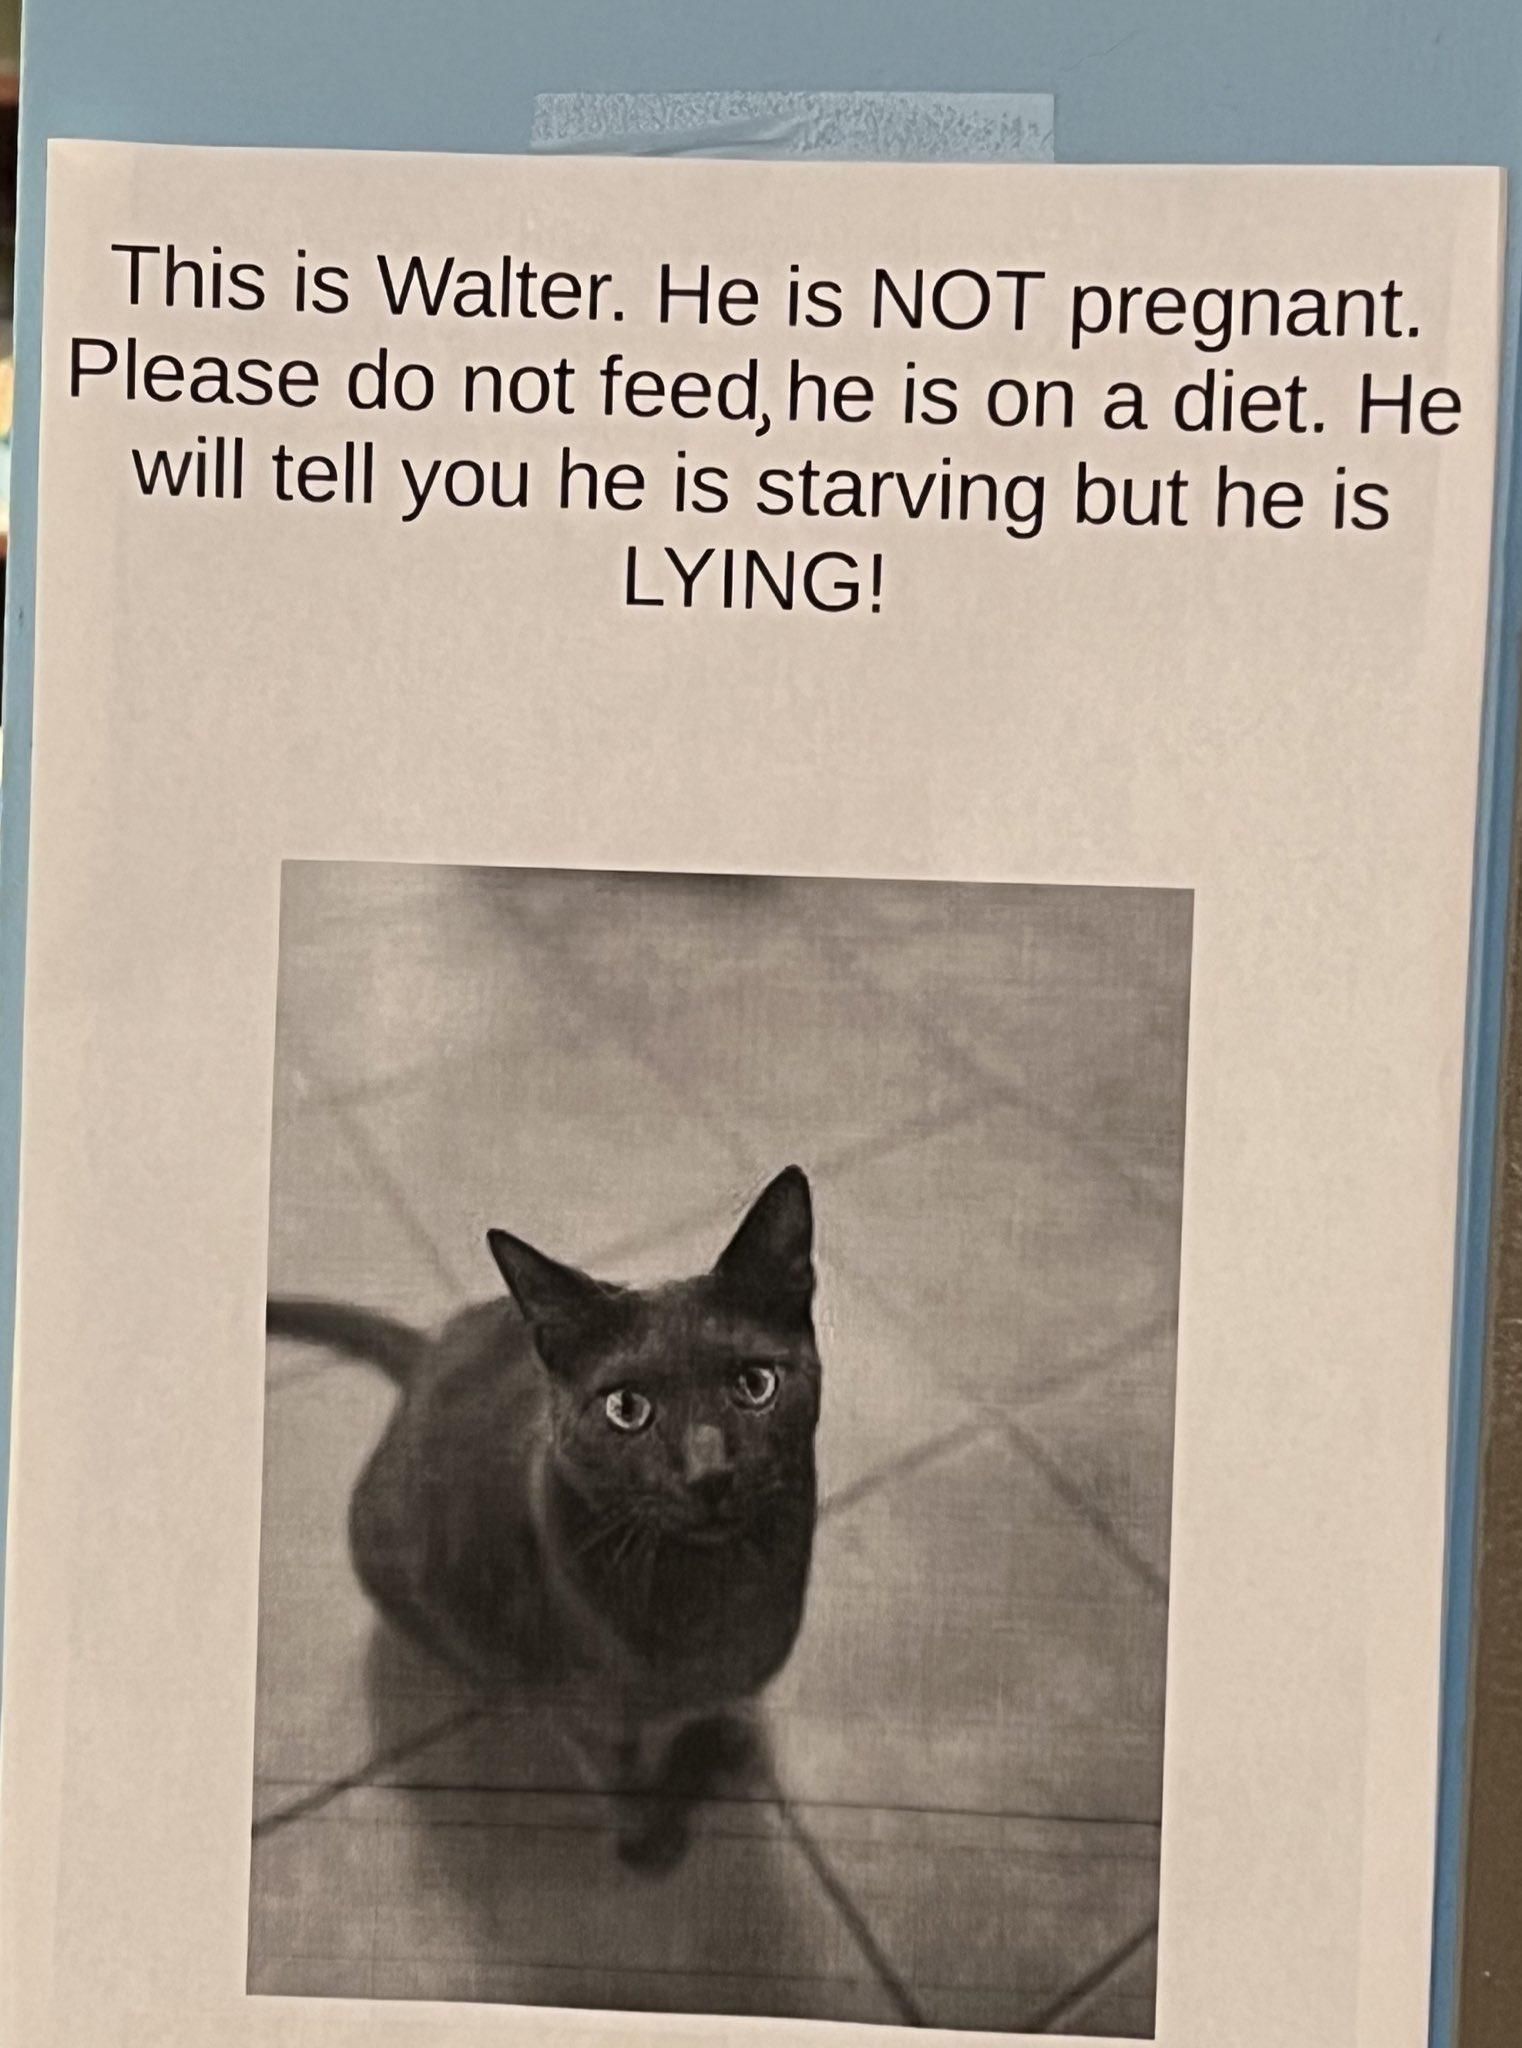 Walter is not pregnant!